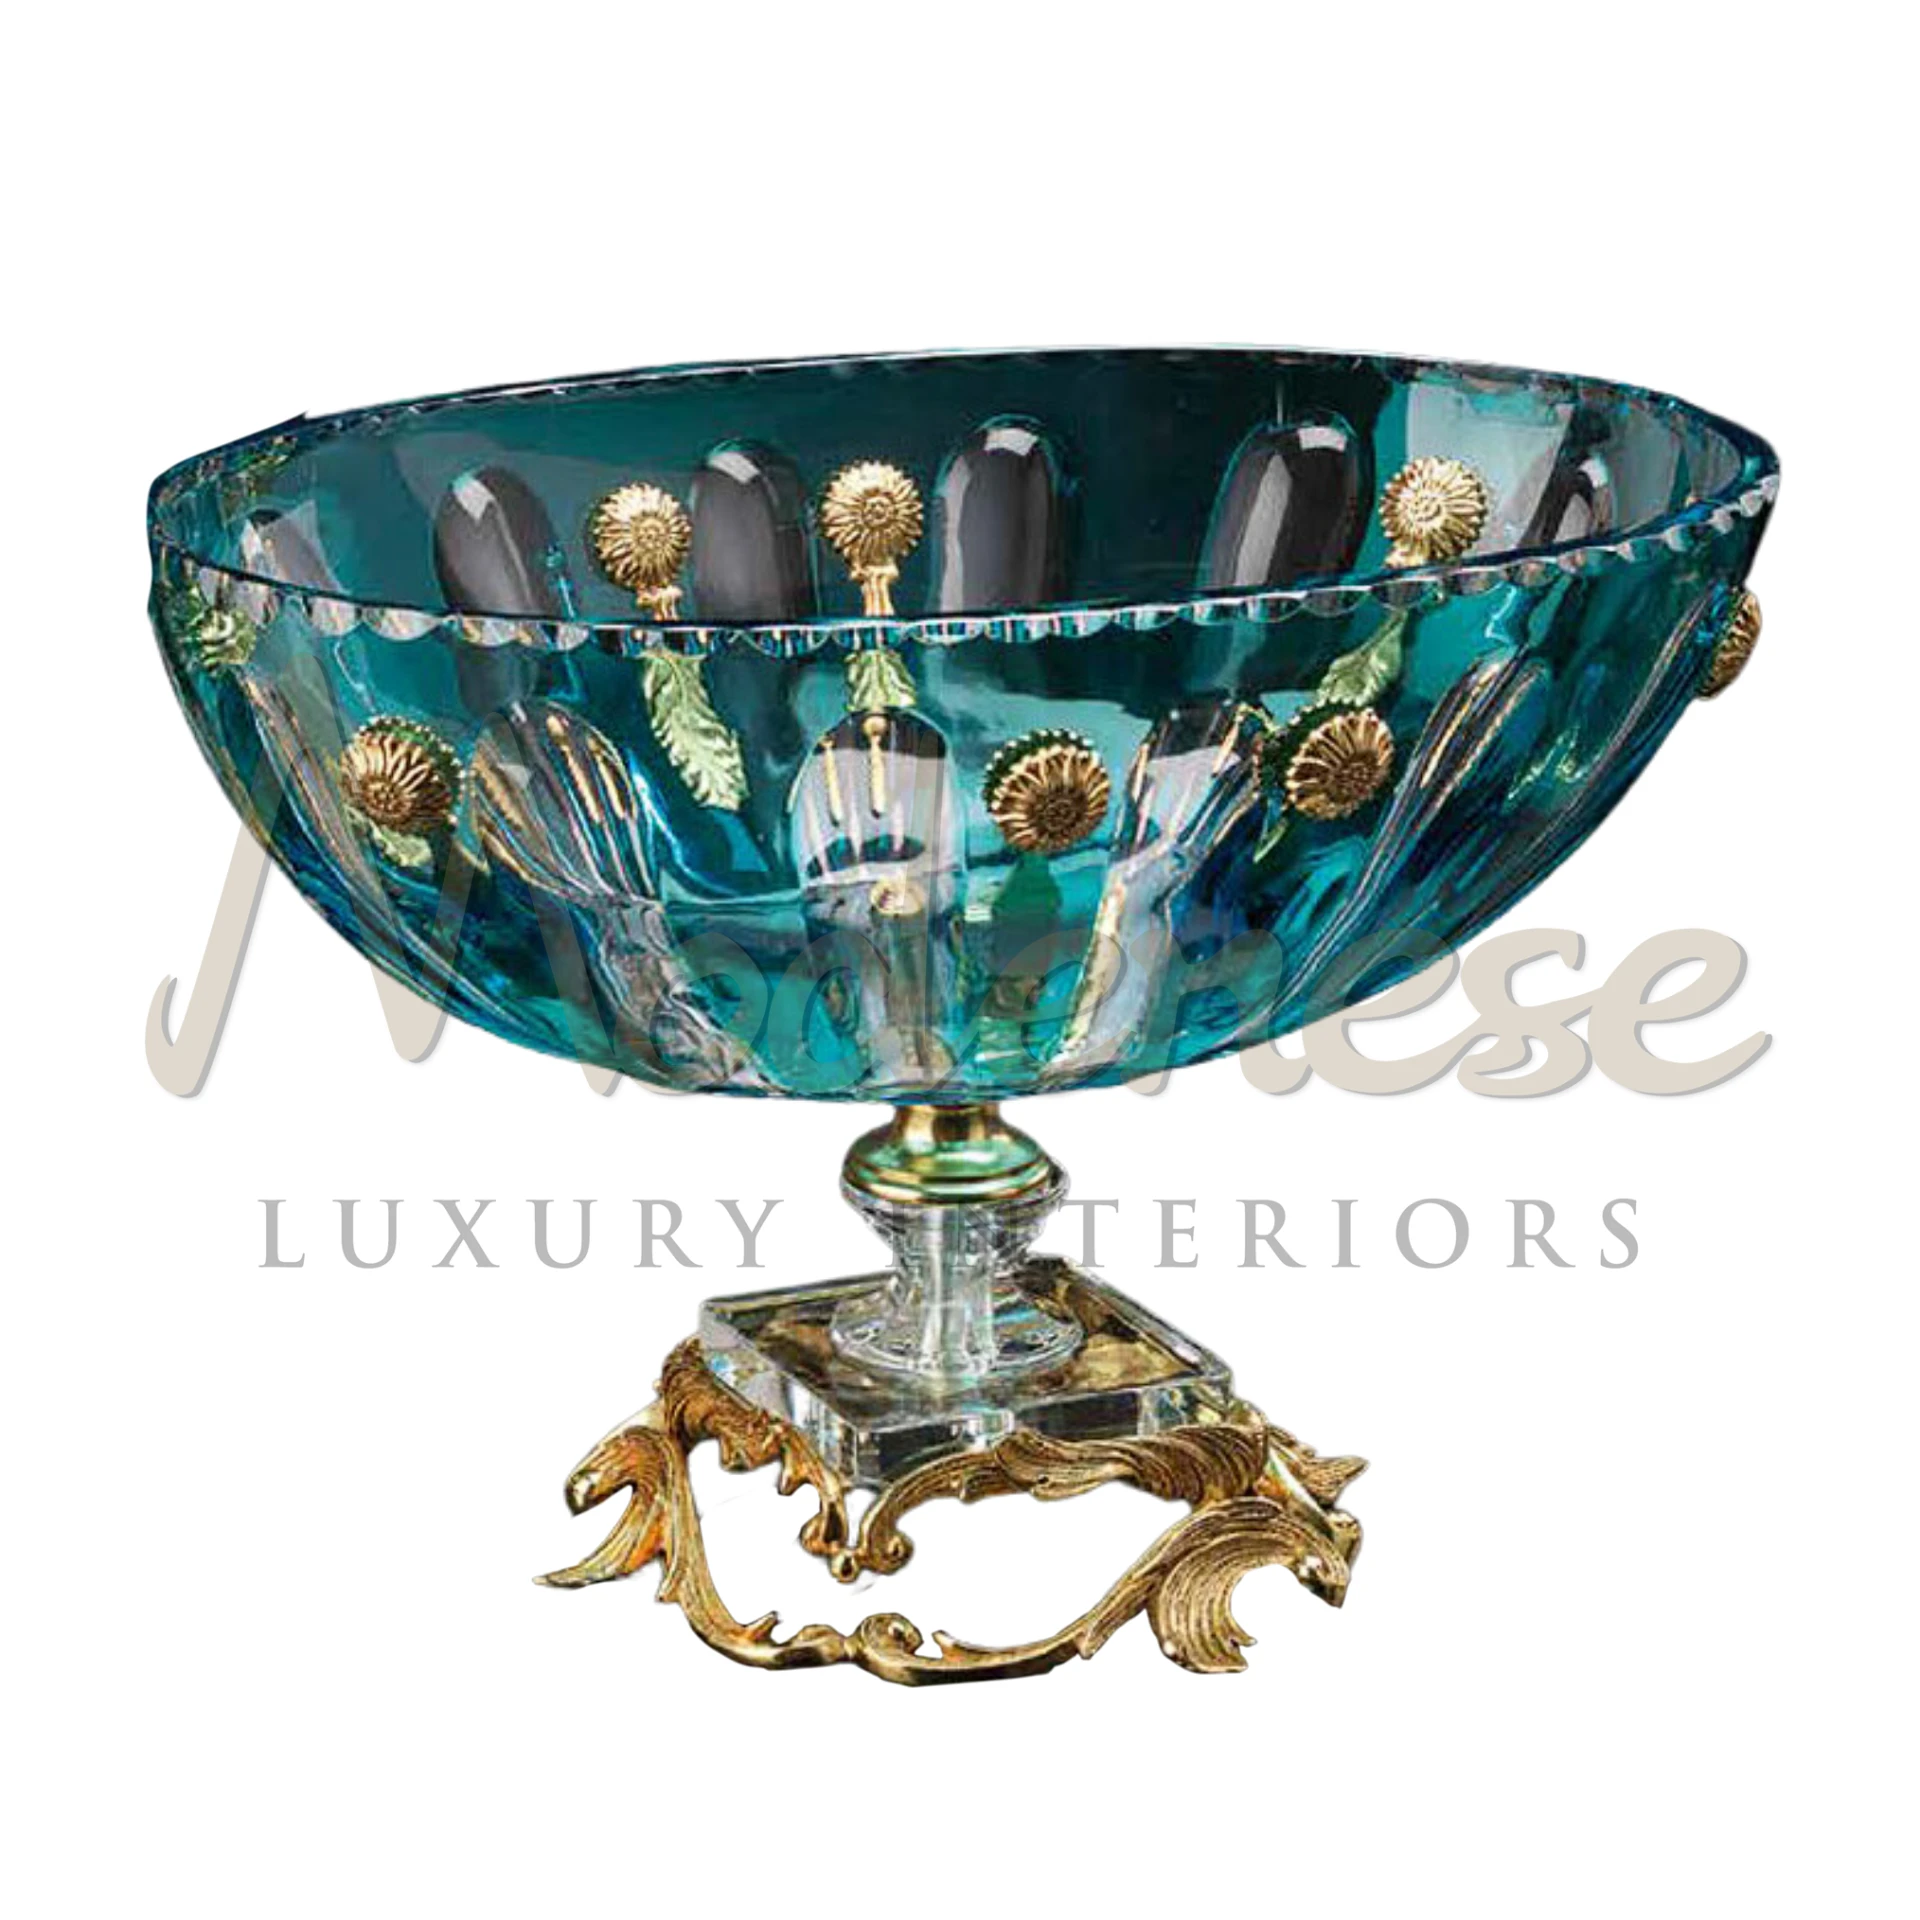 Victorian Turquoise Bowl with intricate designs, symbolizing prosperity and good luck, crafted by skilled artisans for luxurious and classic interior decor.






